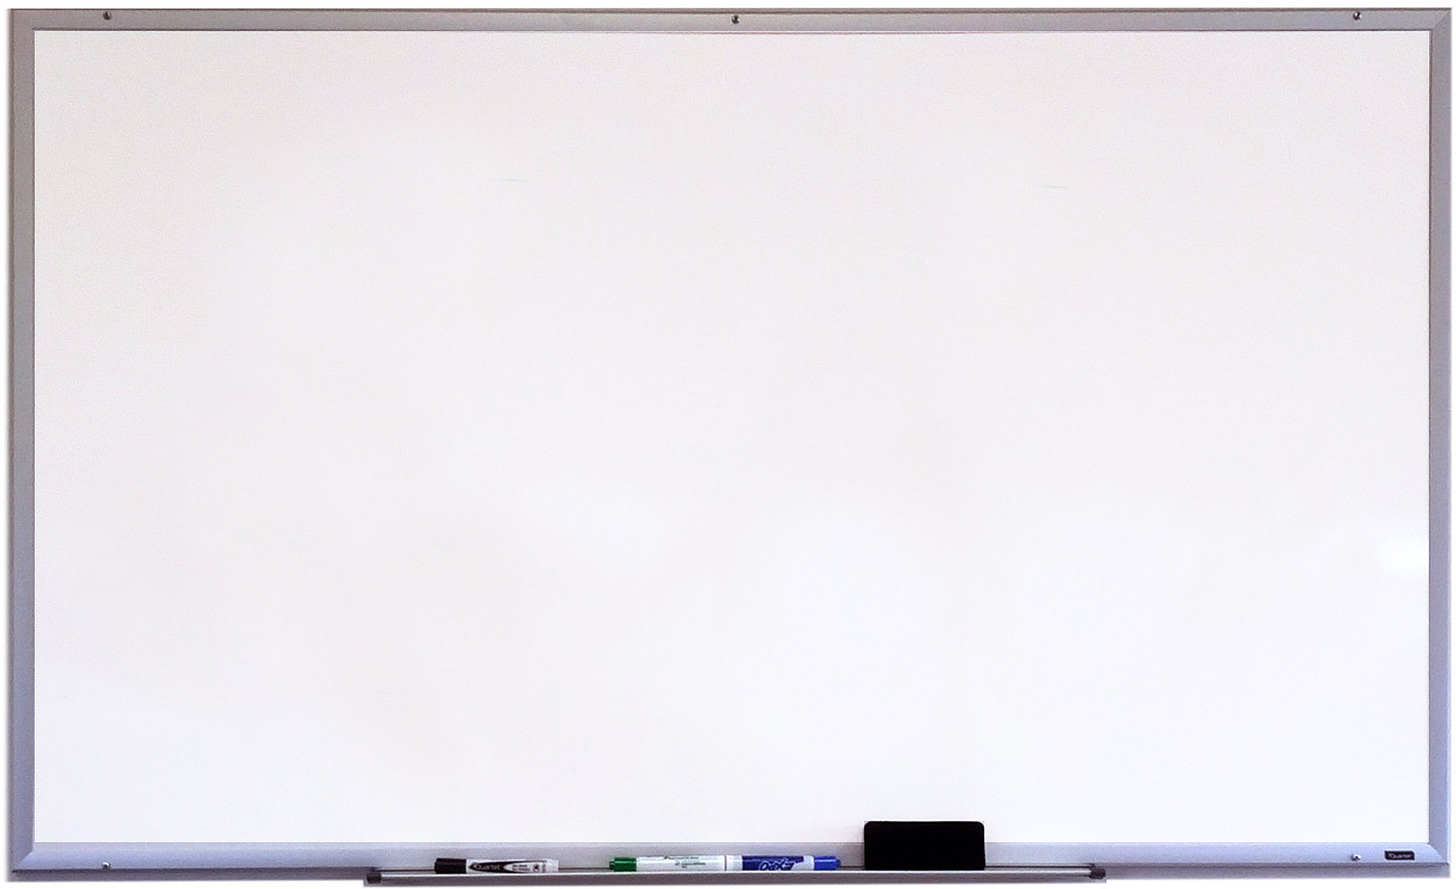 File:Whiteboard with markers.jpg - Wikipedia